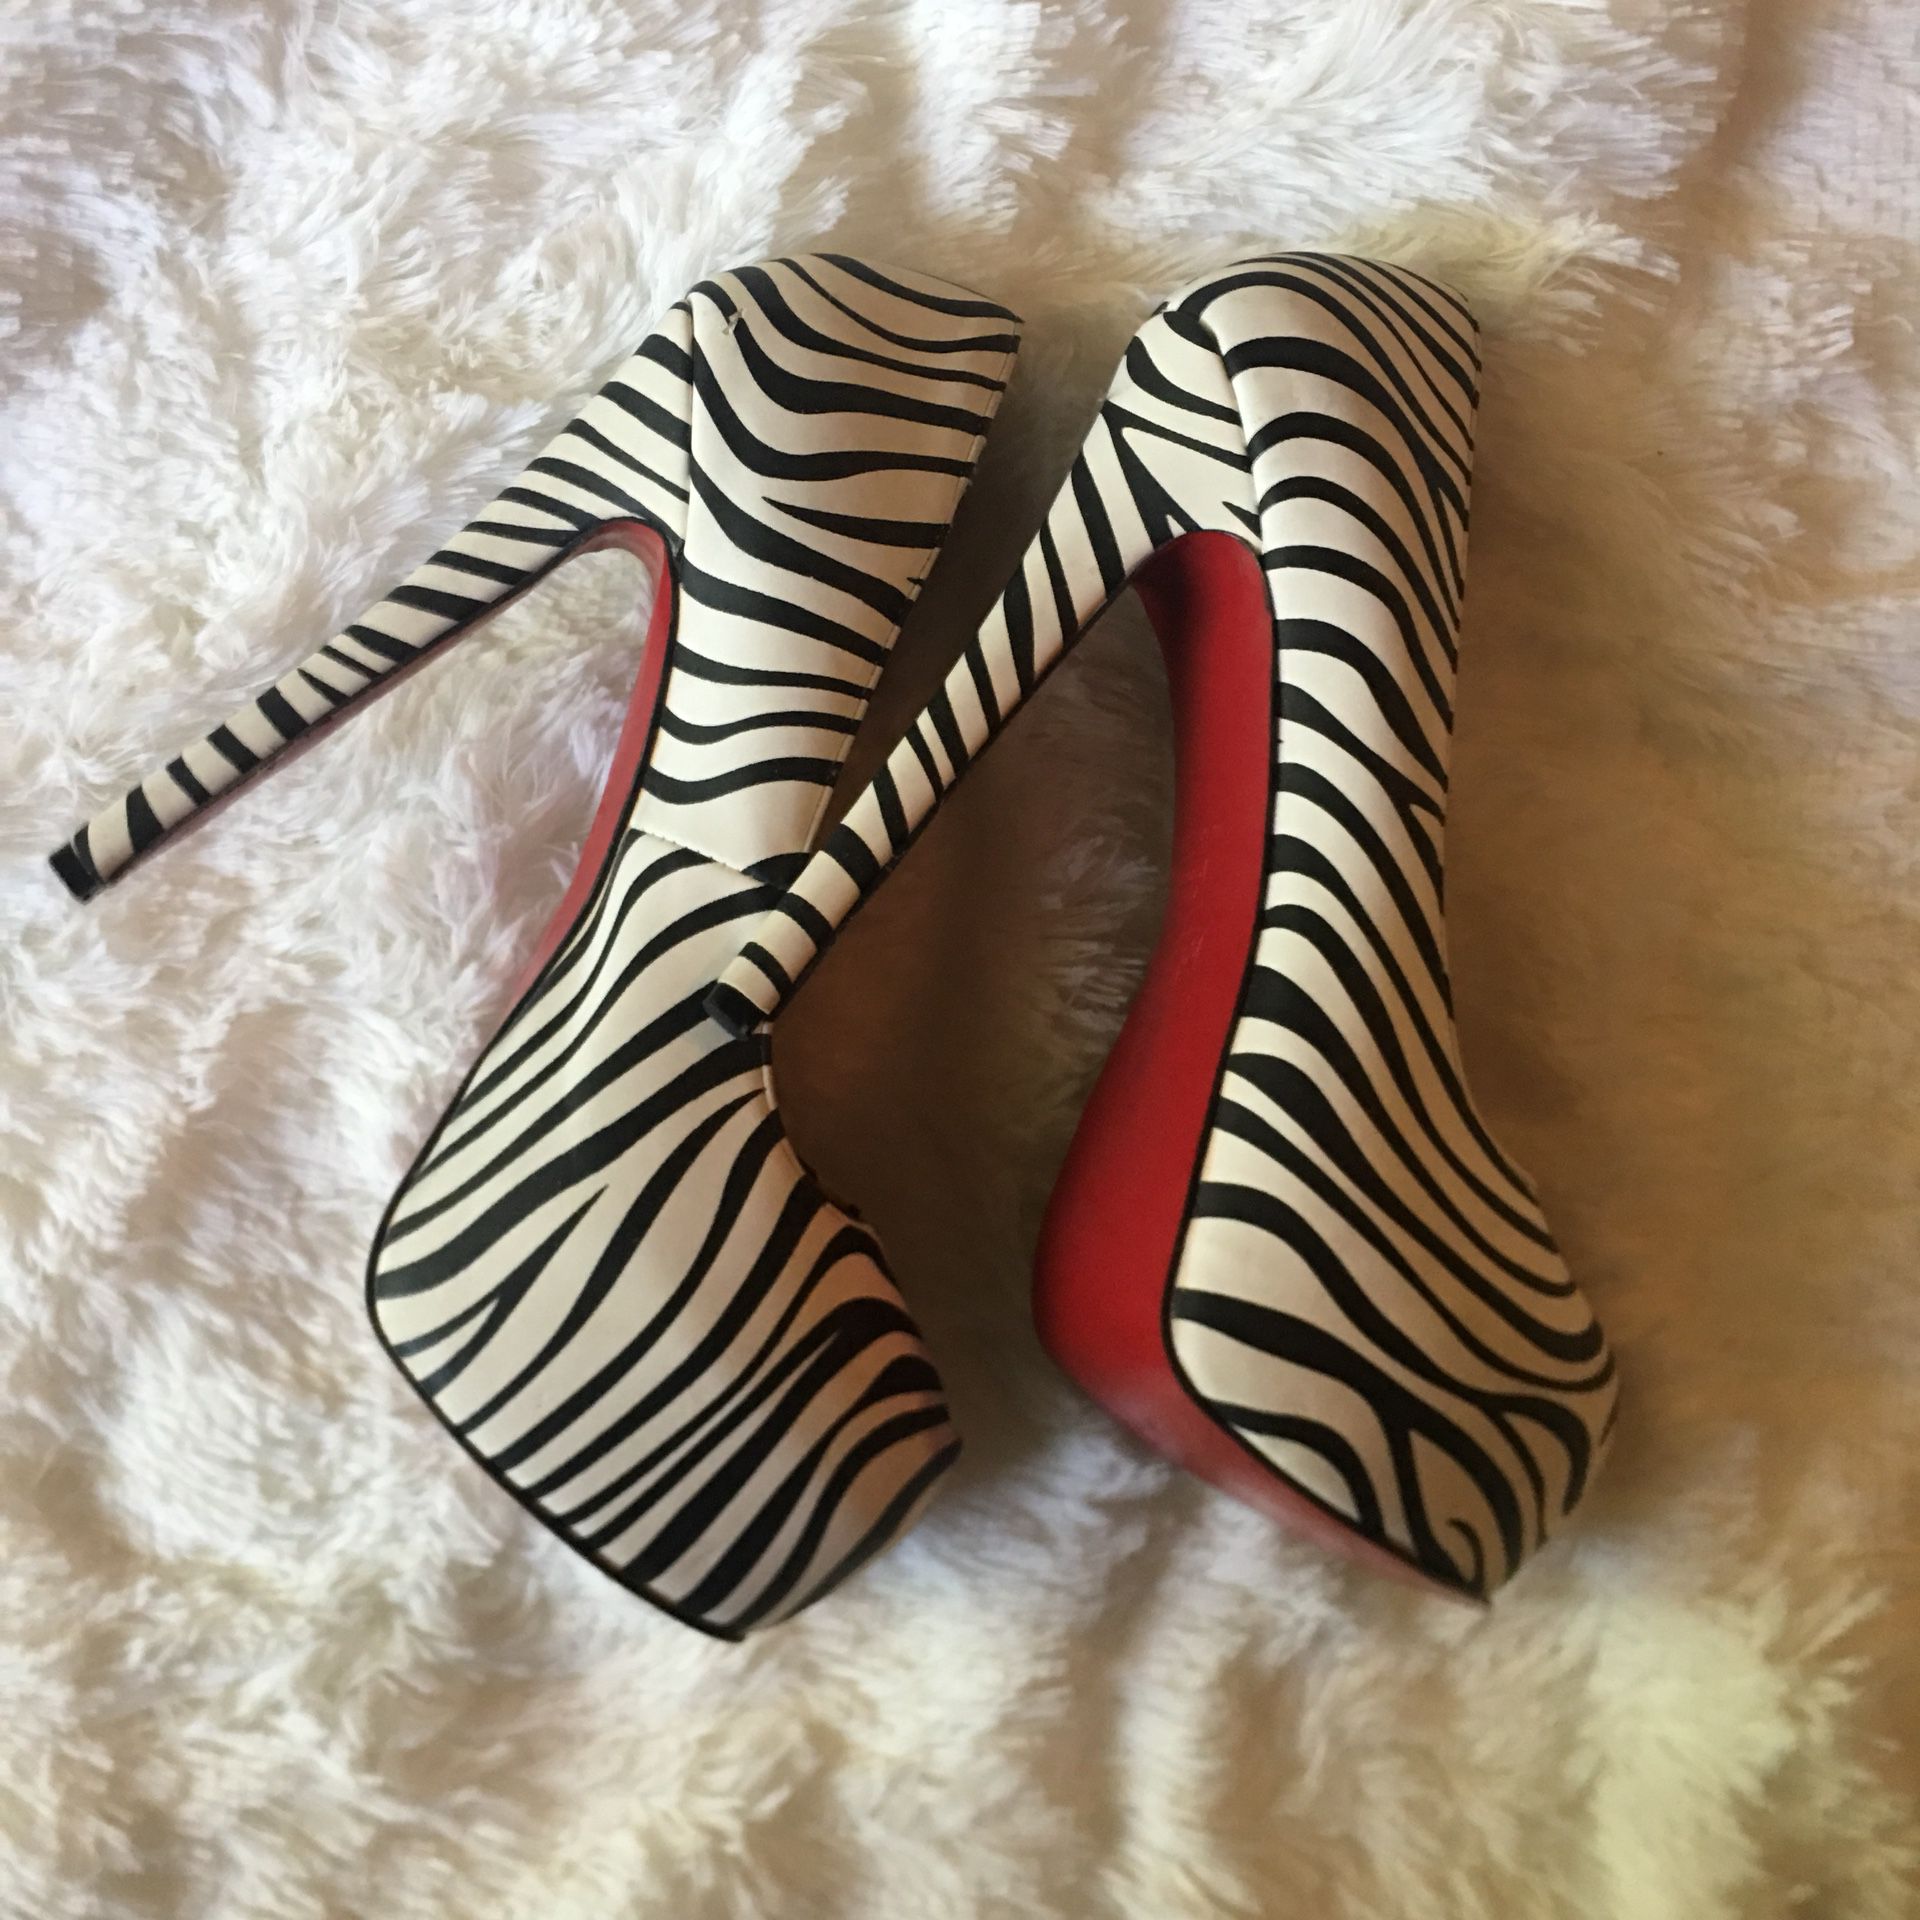 Sexy zebra heels with red bottoms